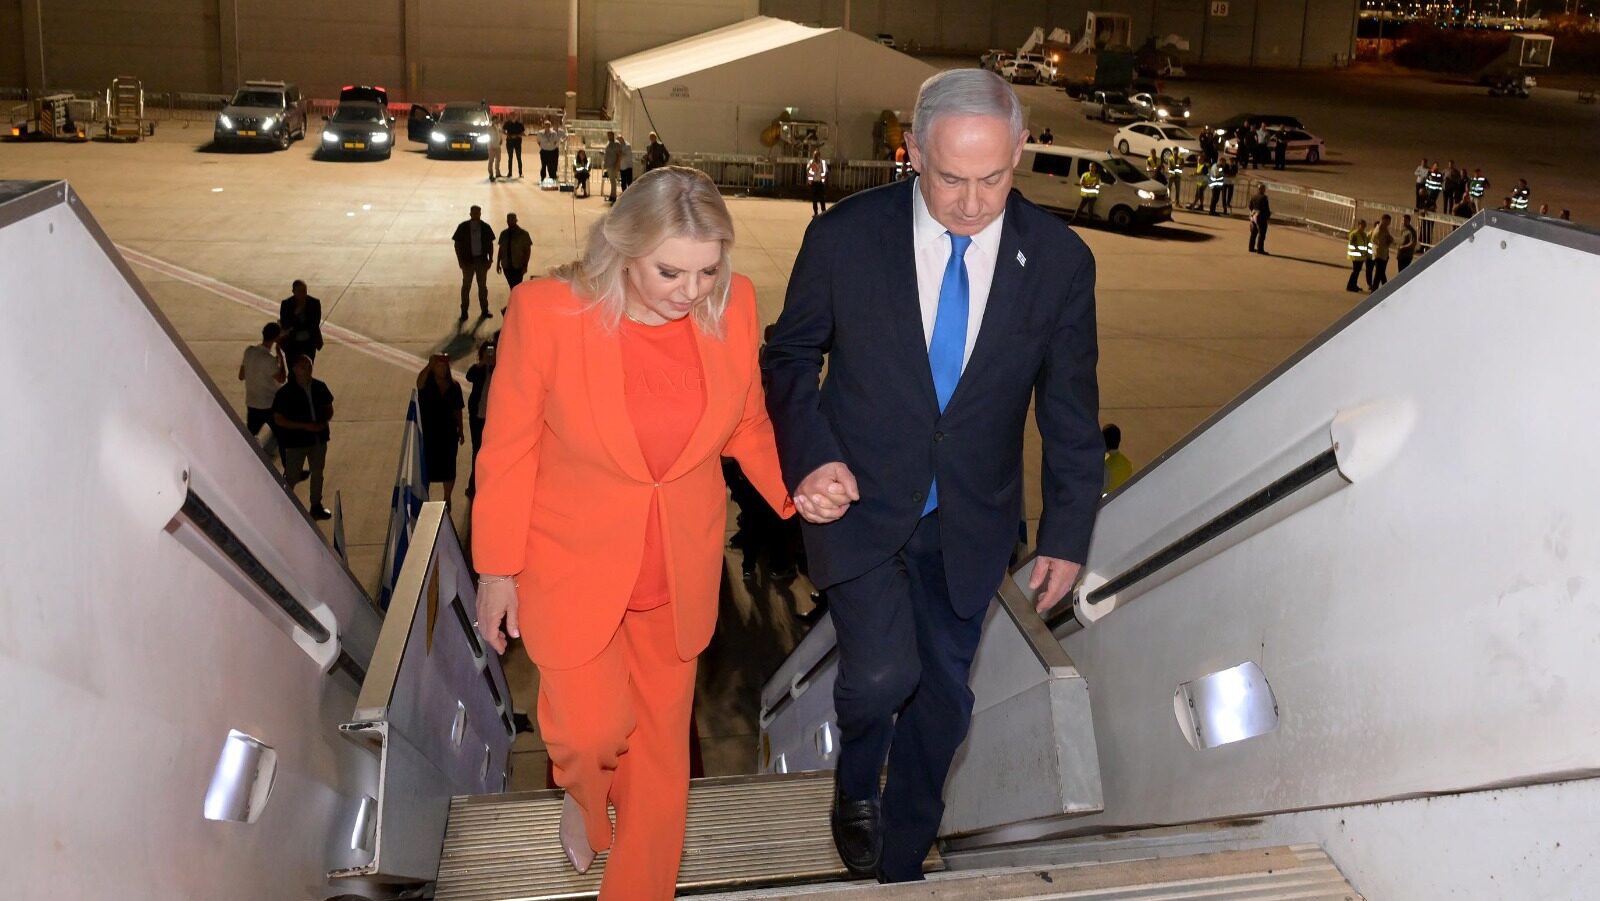 Netanyahu Departs for US Visit, Faces Backlash for Criticizing Anti-Overhaul Protesters